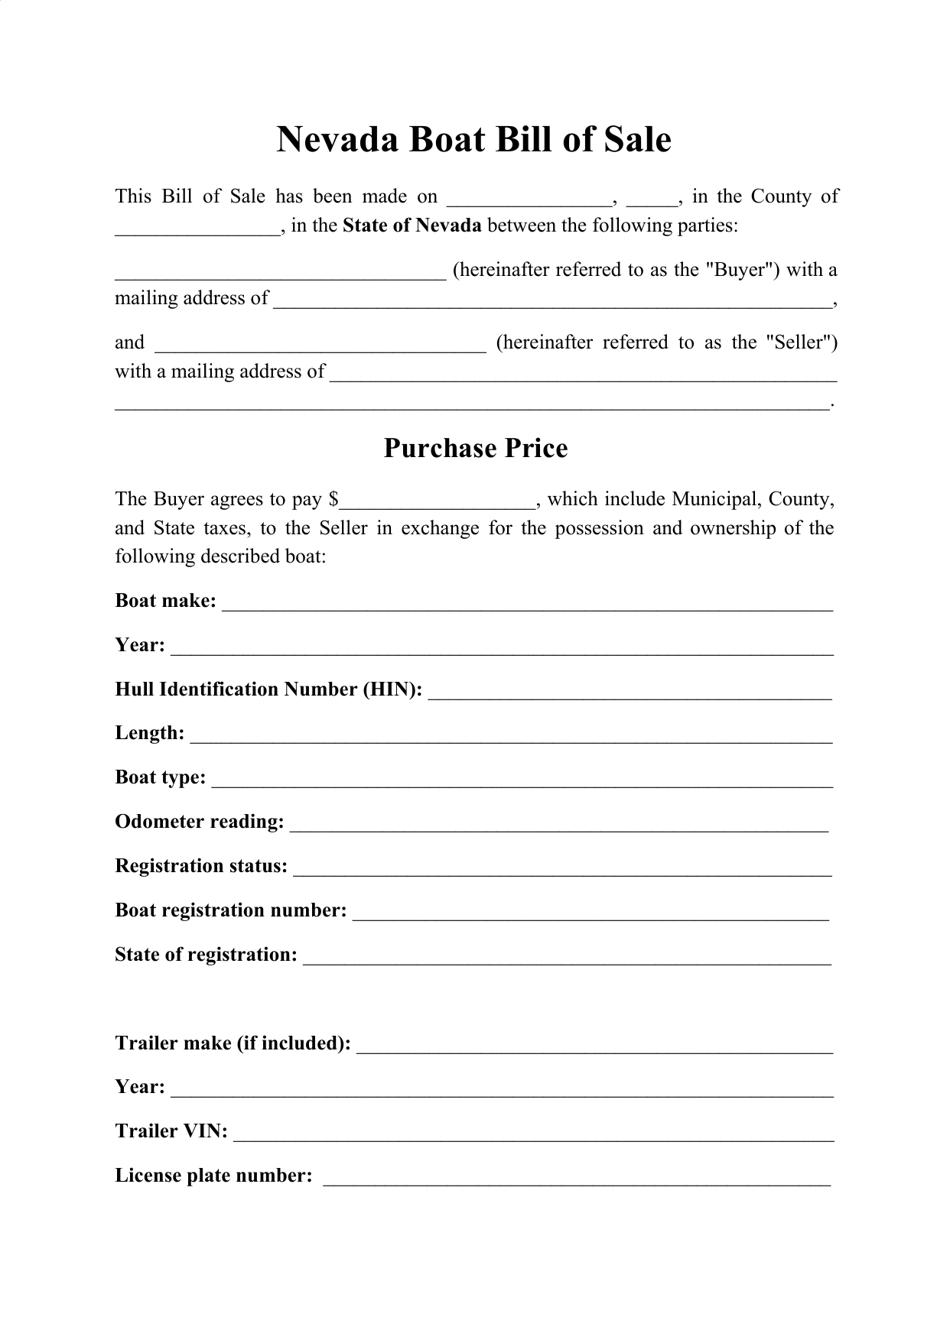 Boat Bill of Sale Form - Nevada, Page 1